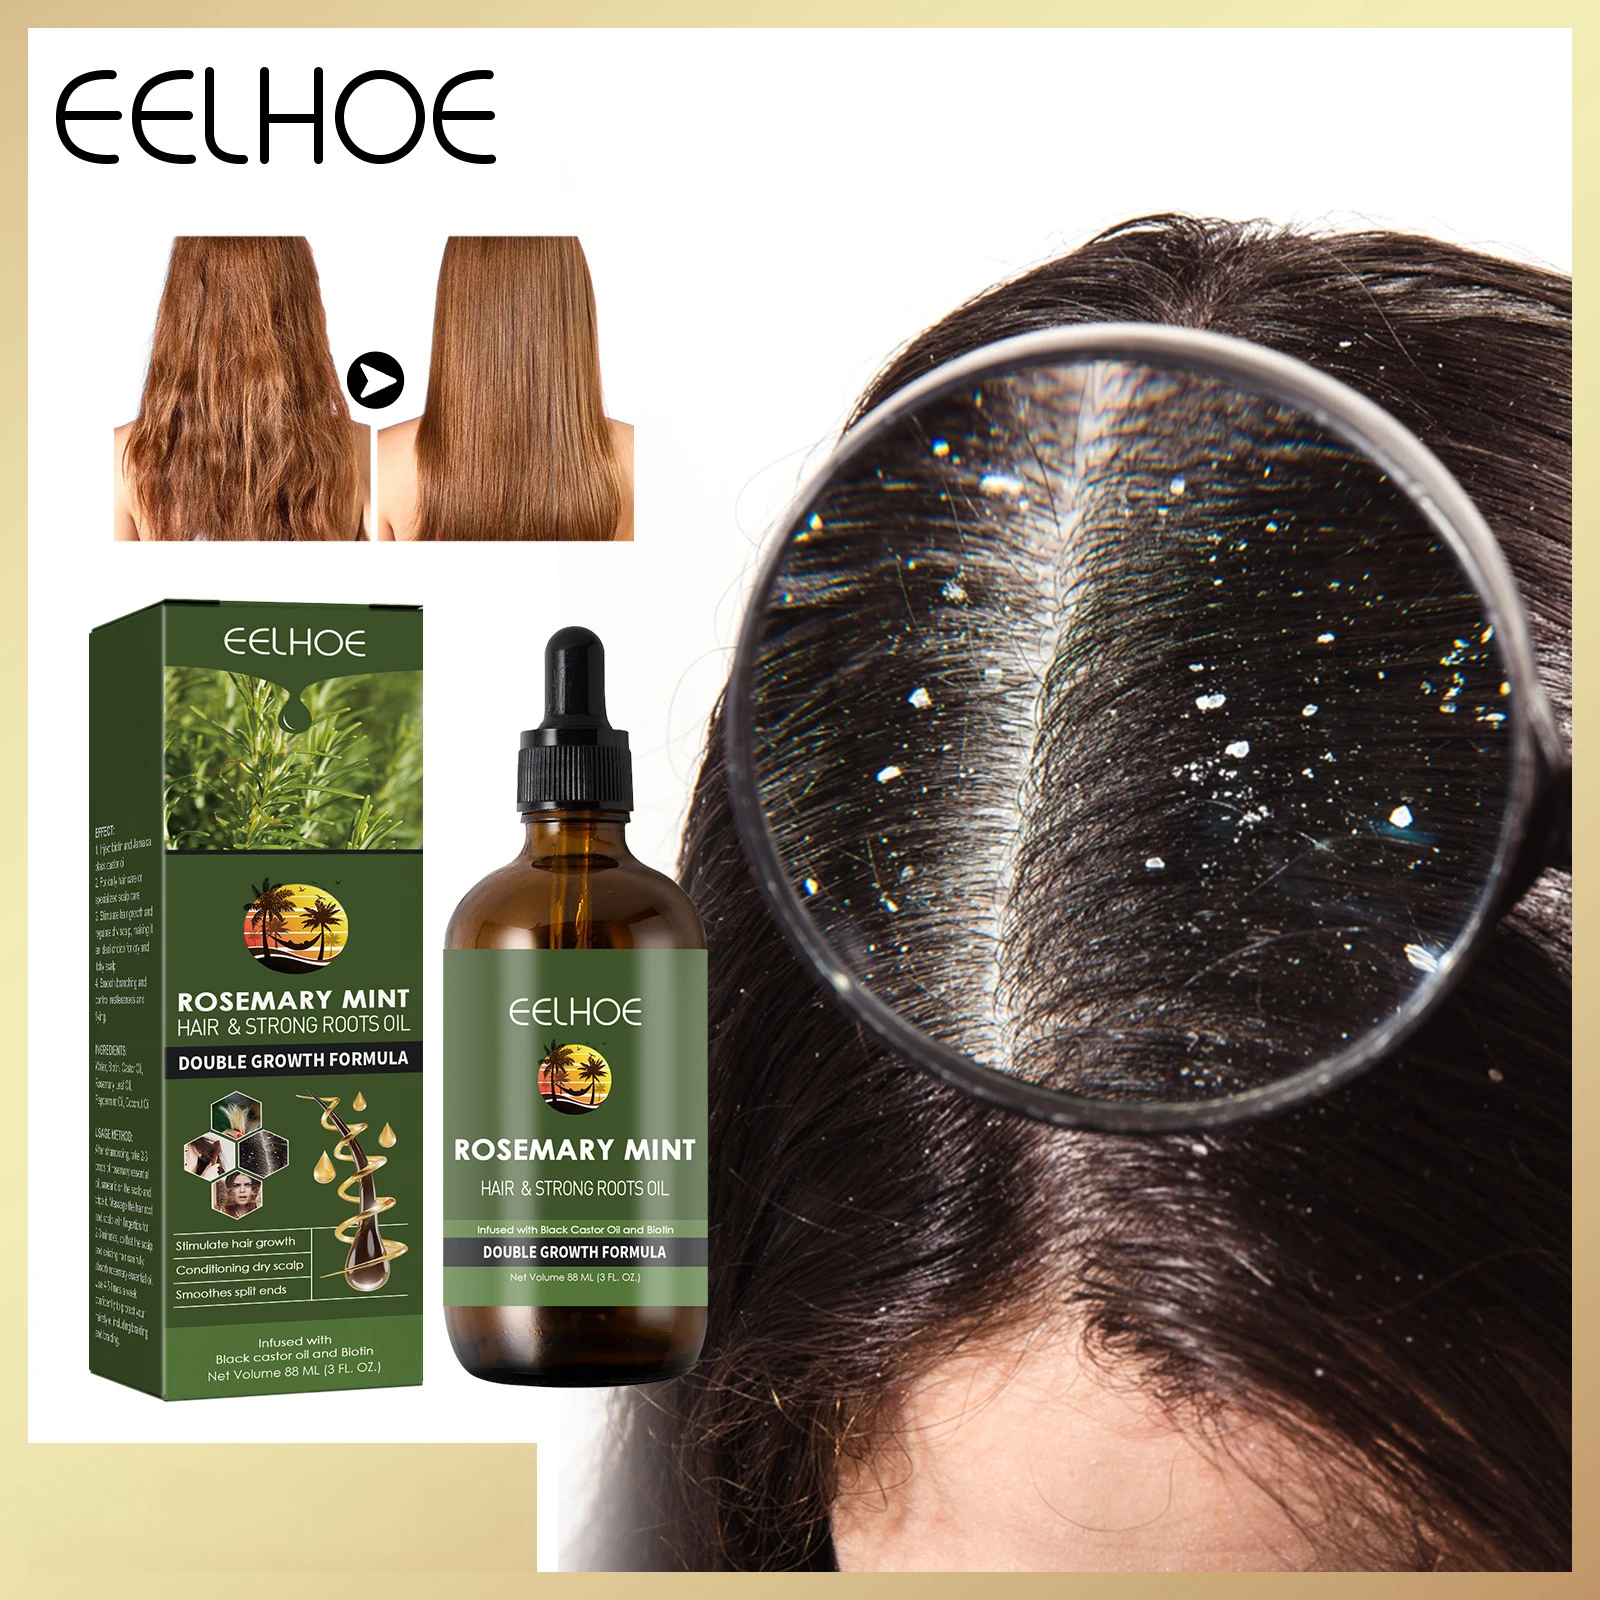 Rosemary Oil Hair Growth Treatment Conditioning for Dry and Damaged Hairs with EELHOE Hair Loss Product Series Hair Growth Serum антифрикционная присадка liquimoly truck series oil treatment 20998